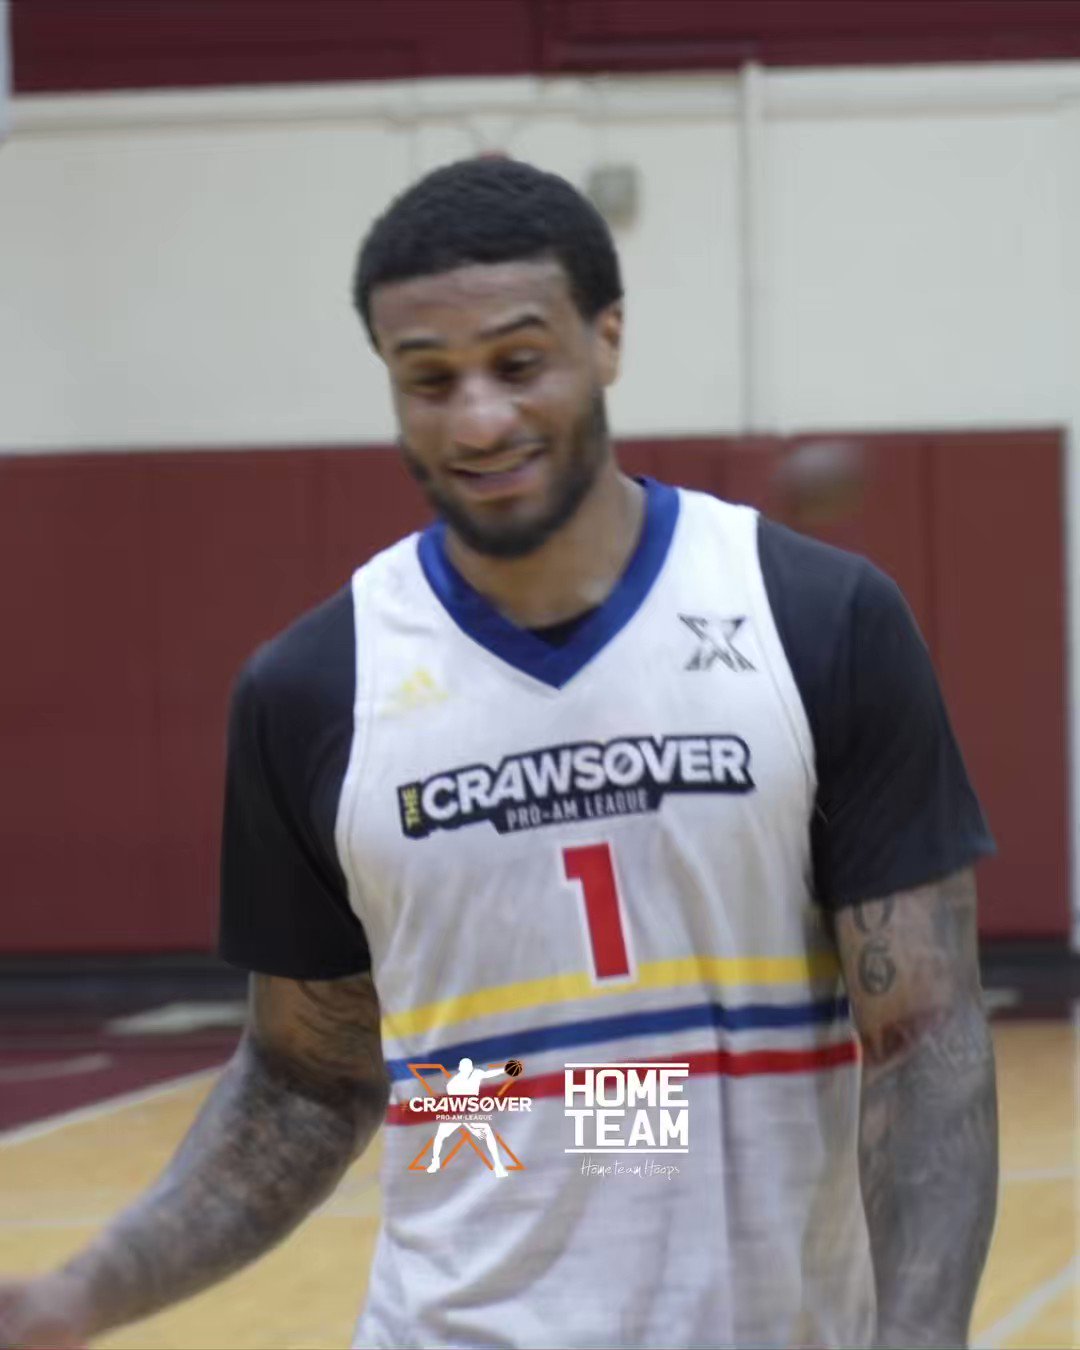 Home Team Hoops on X: Gary Payton II at the CrawsOver Pro Am